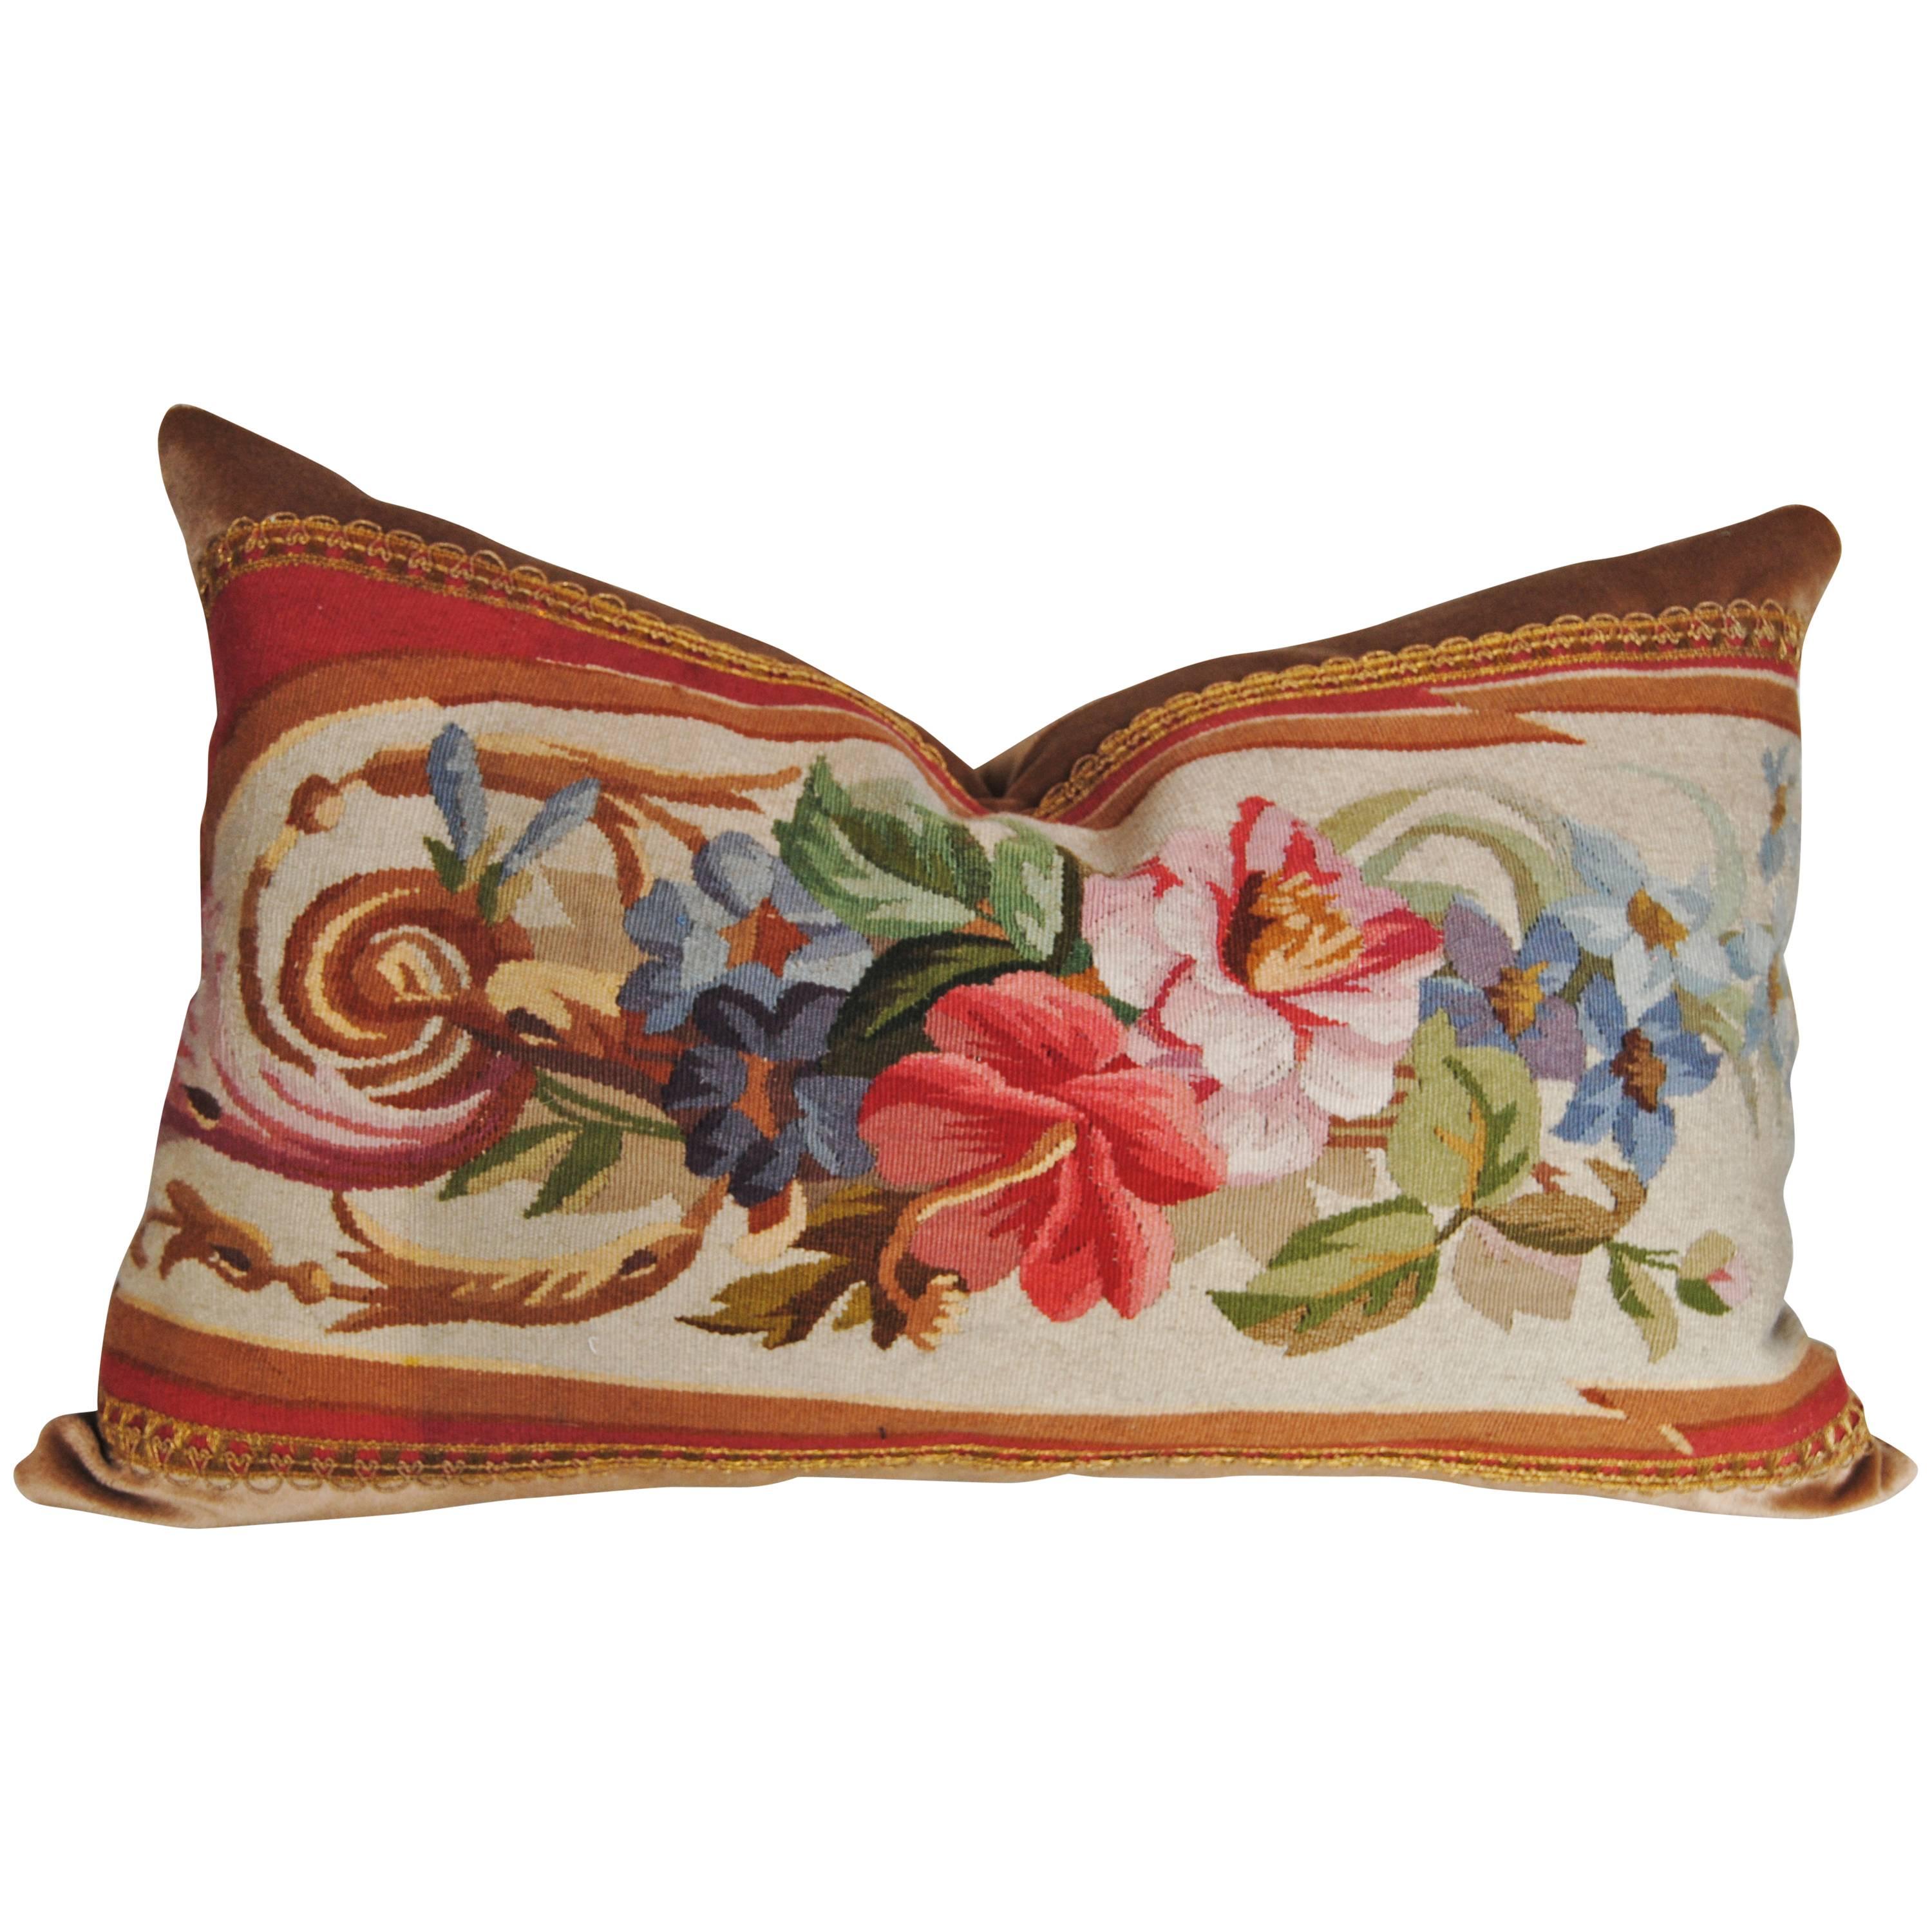 Antique French Aubusson Pillow from an Antique Portiere For Sale